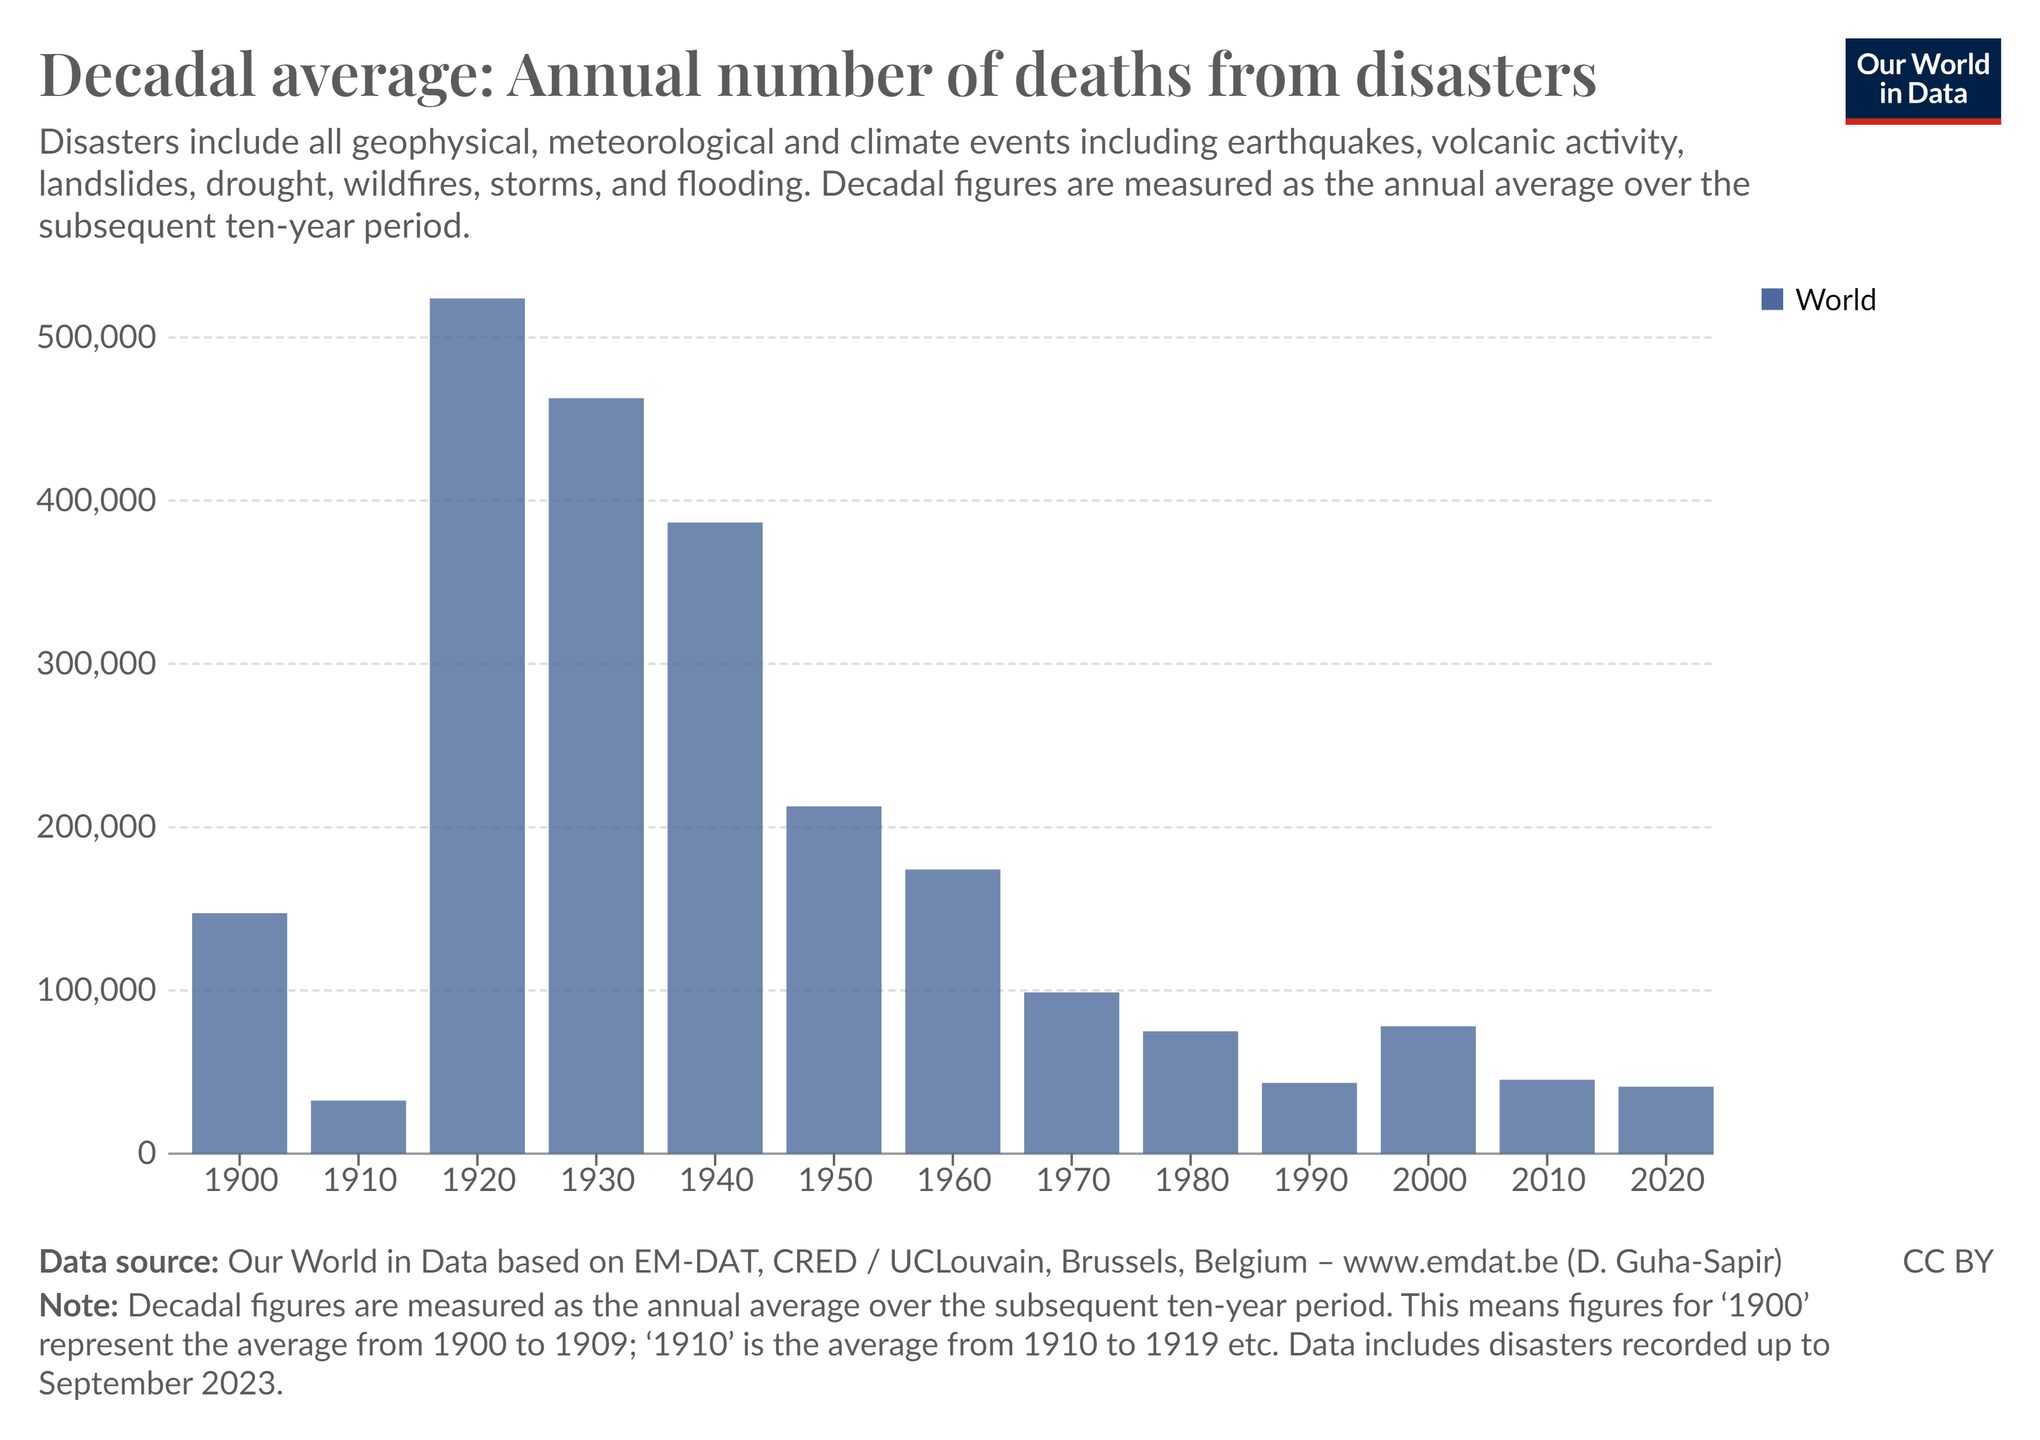 Bar chart displaying the annual number of deaths from disasters between 1900 and 2020